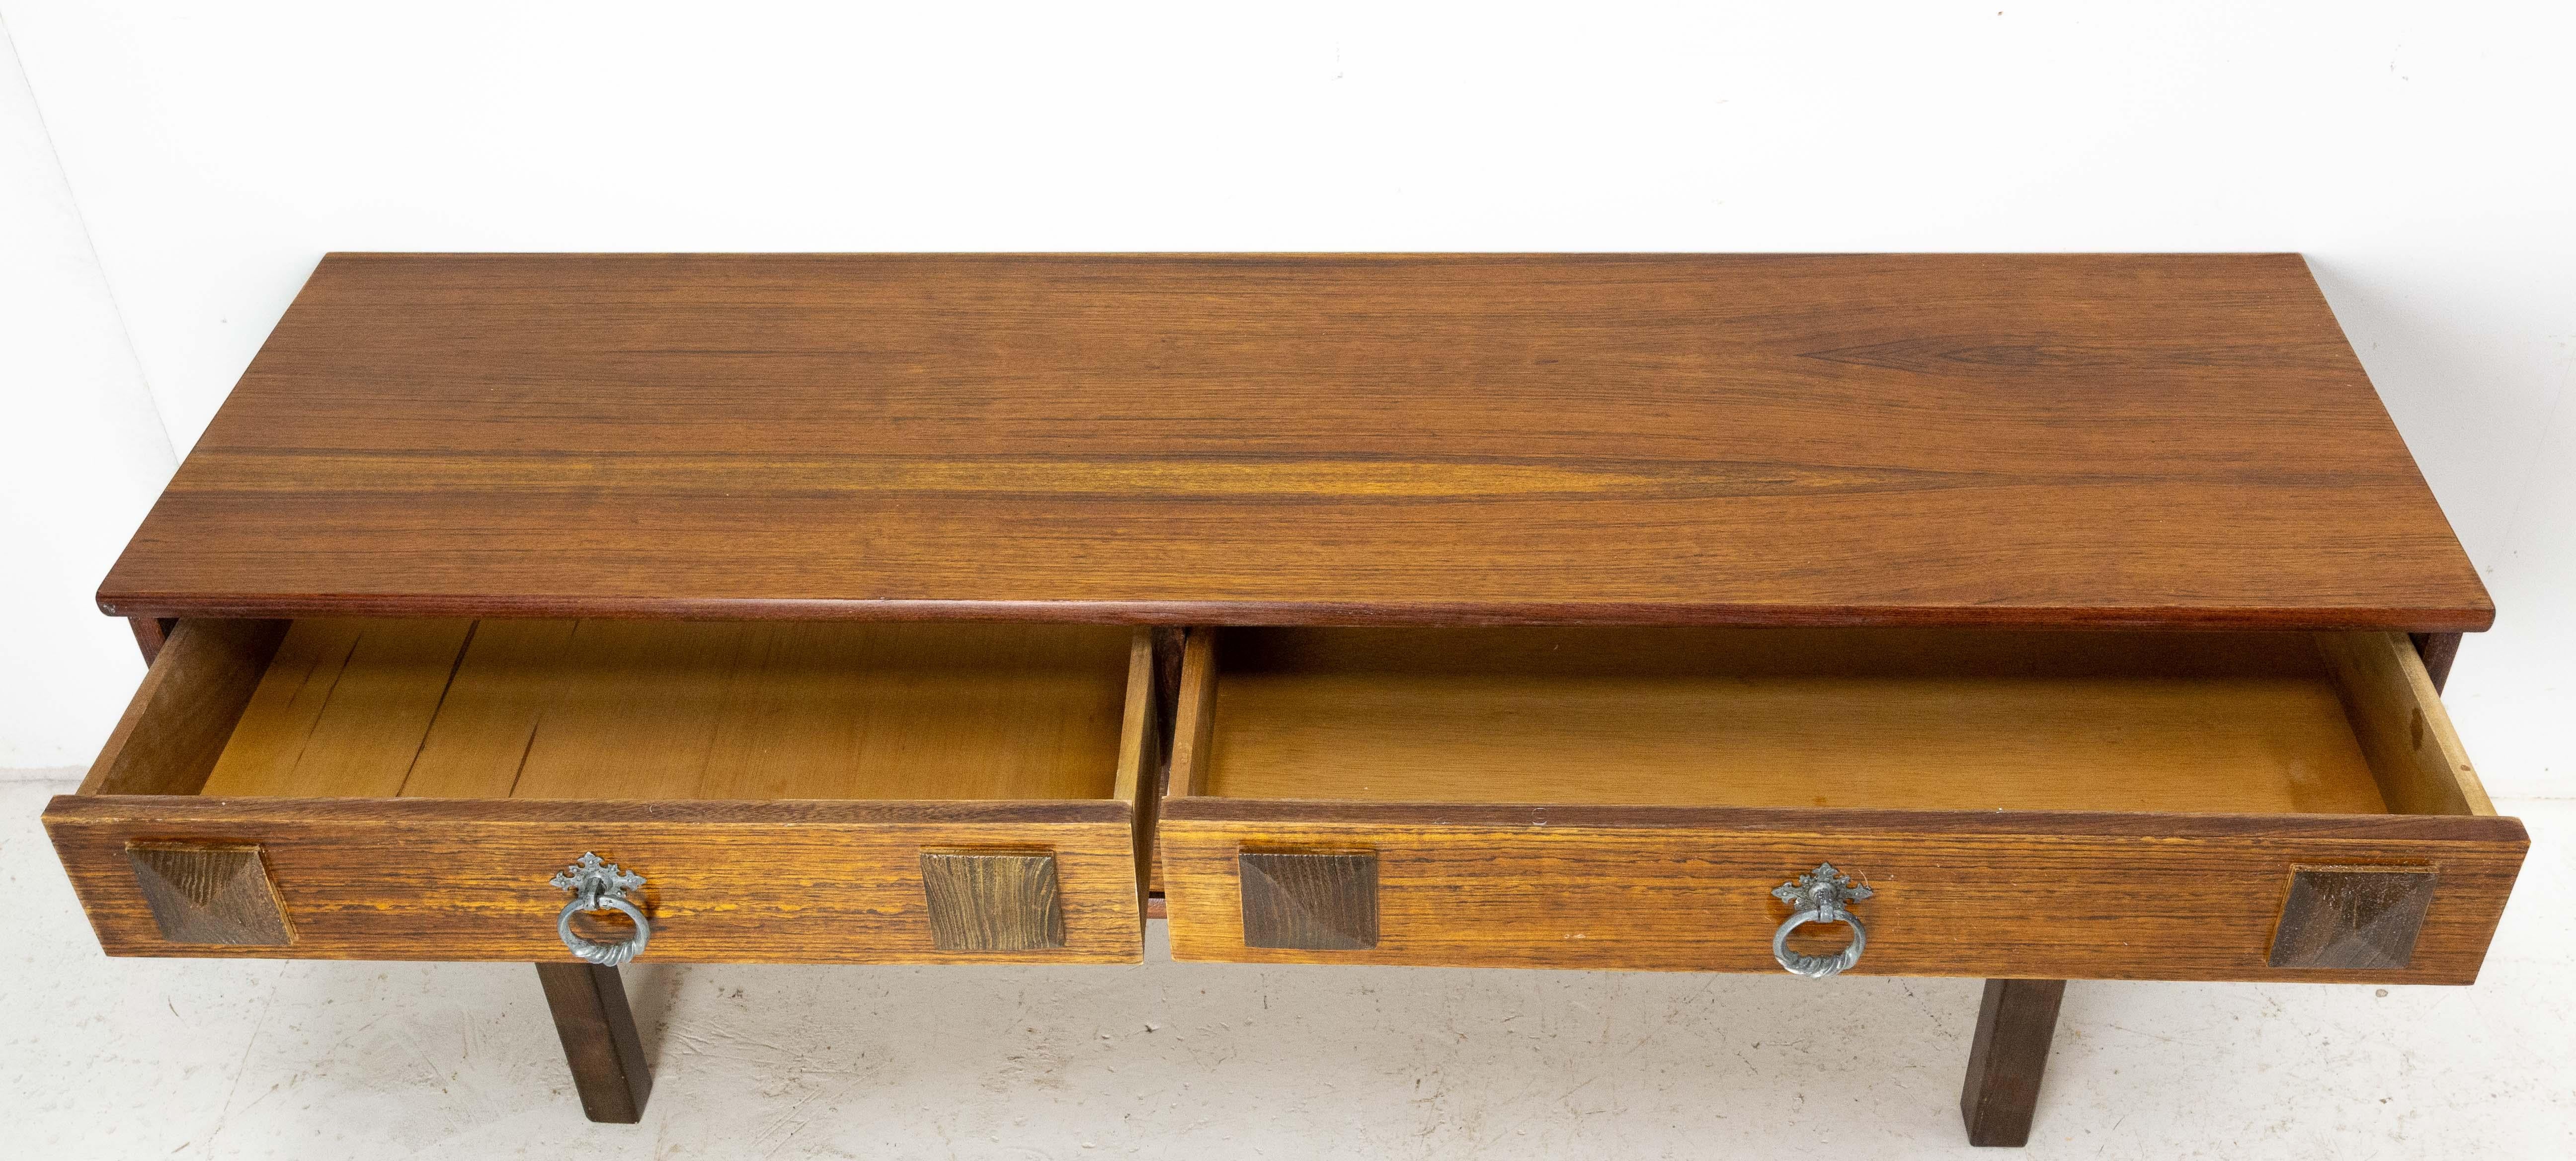 French Vintage Side Table or Console Table with Four Drawers, circa 1960 For Sale 2